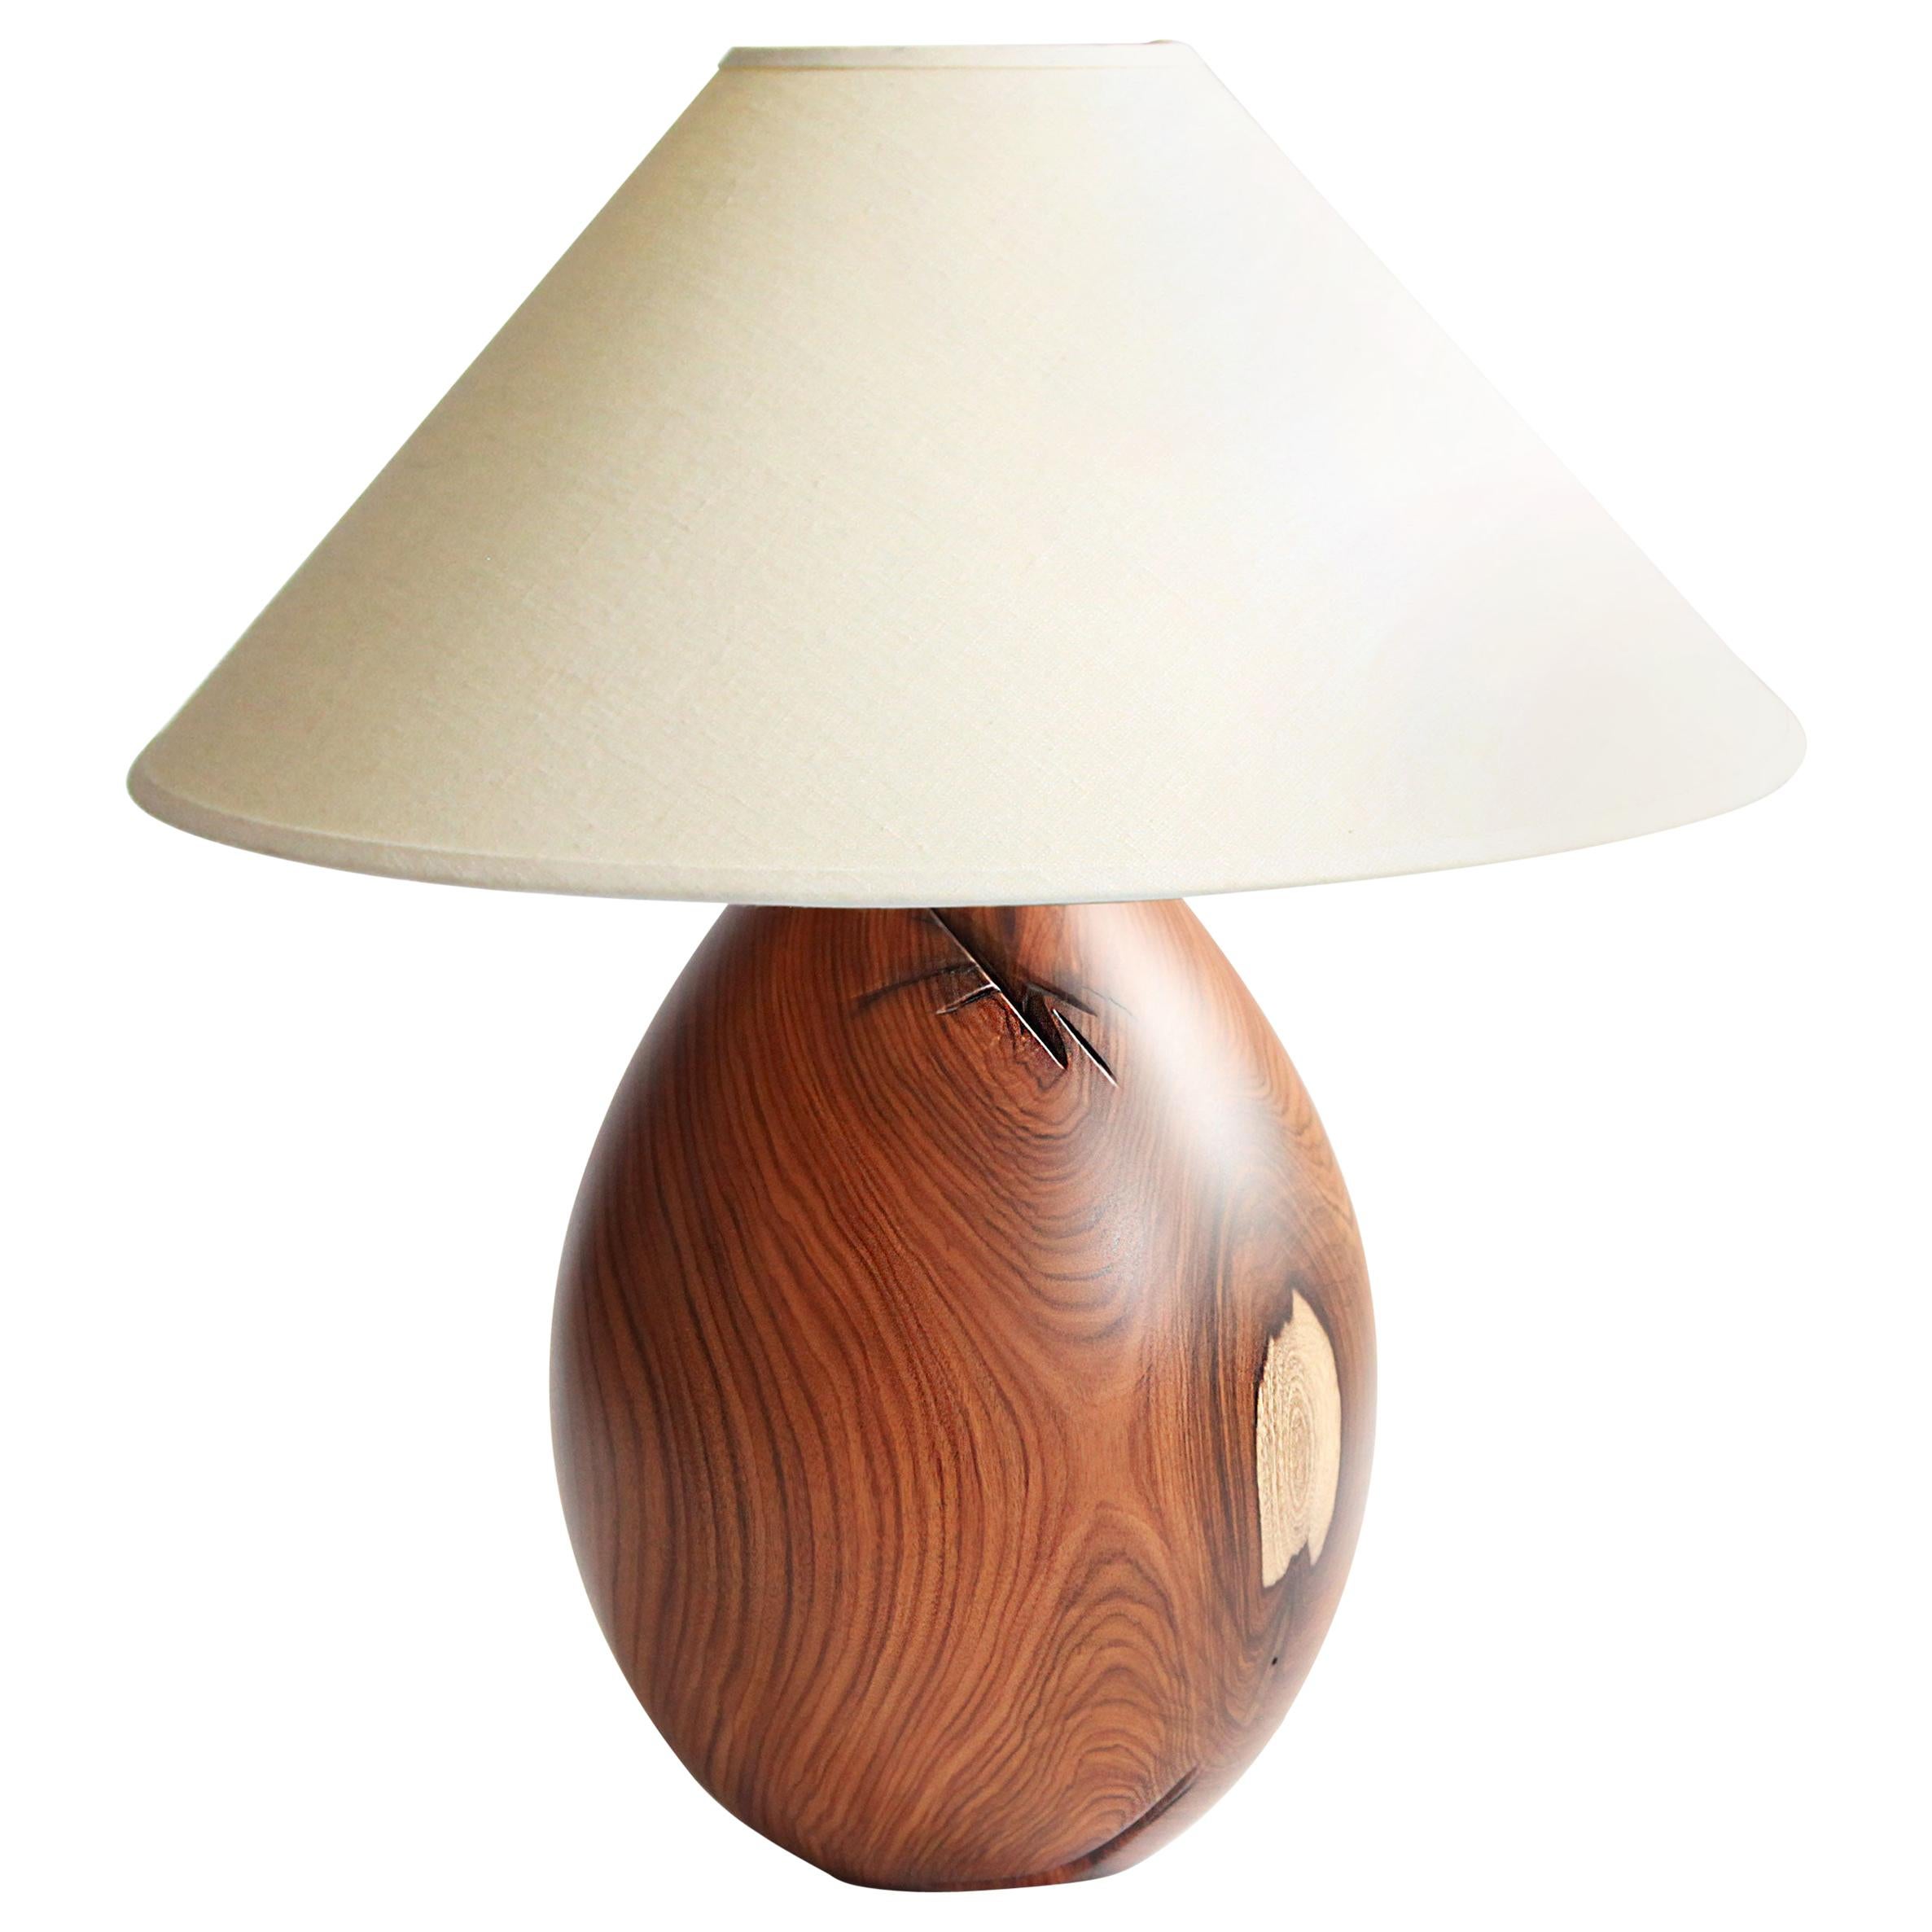 Tropical Hardwood Lamp and White Linen Shade, Medium, Árbol Collection, 27